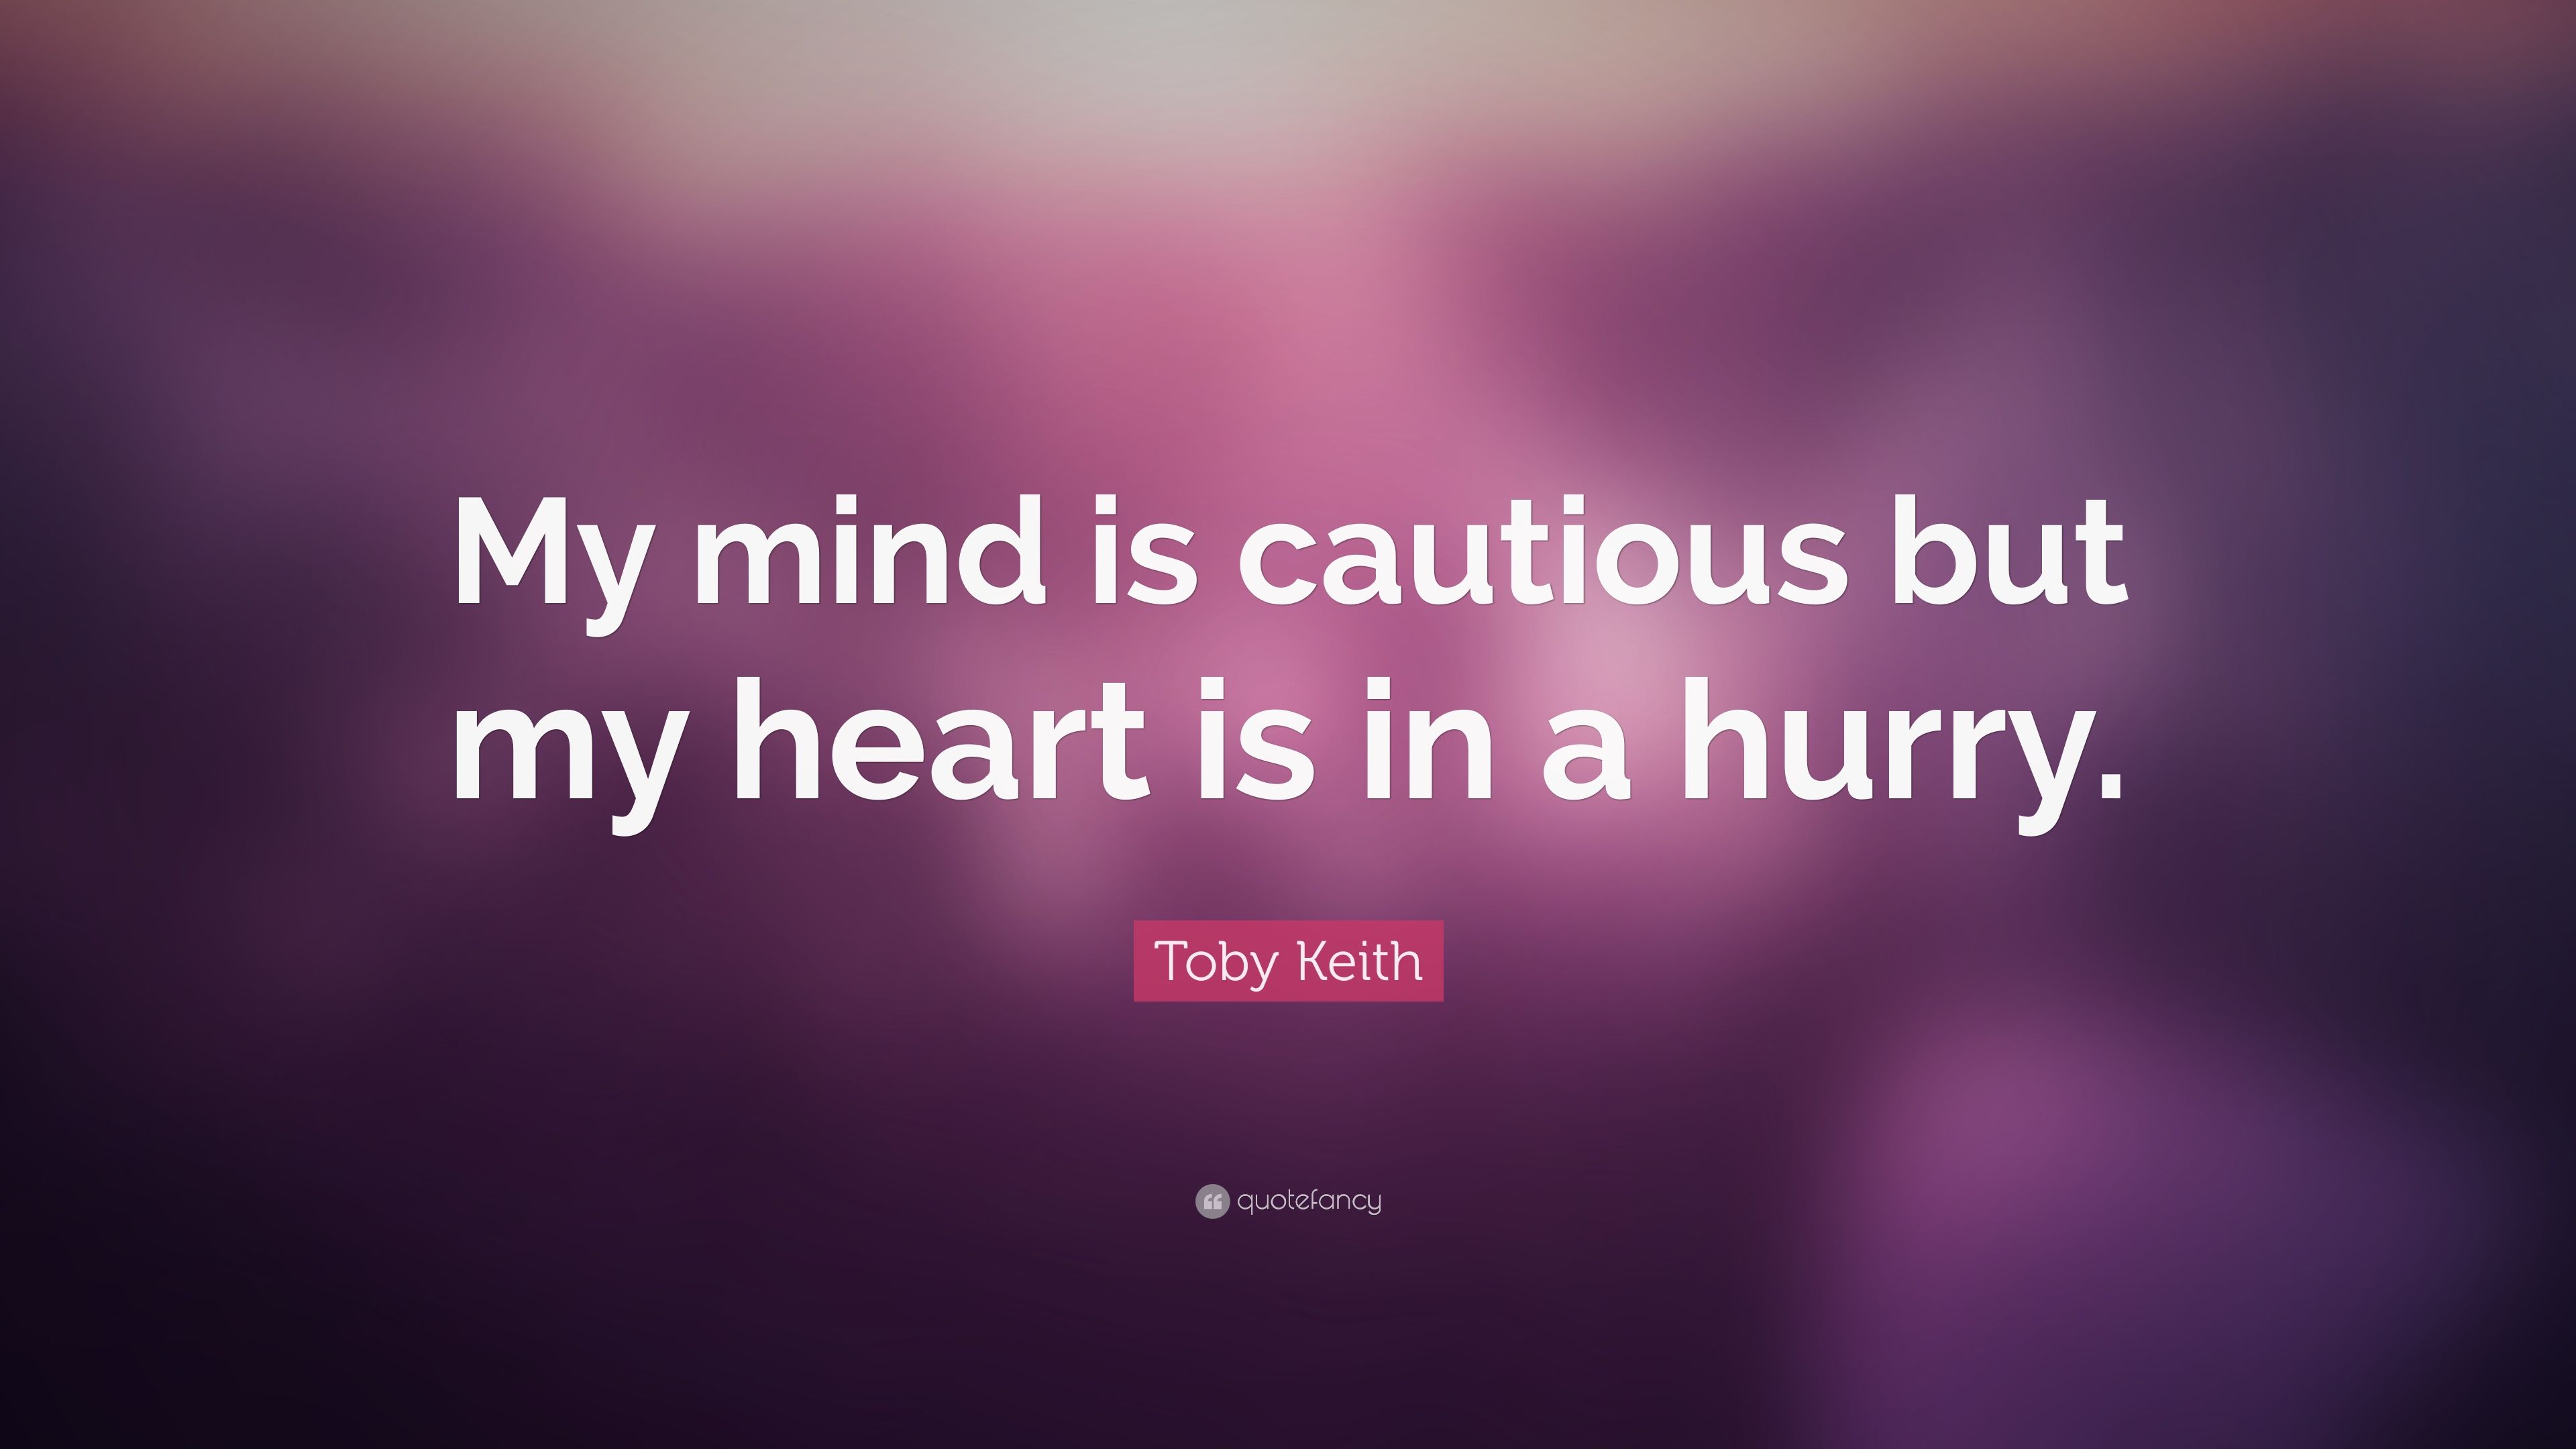 Toby Keith Quote: “My mind is cautious but my heart is in a hurry